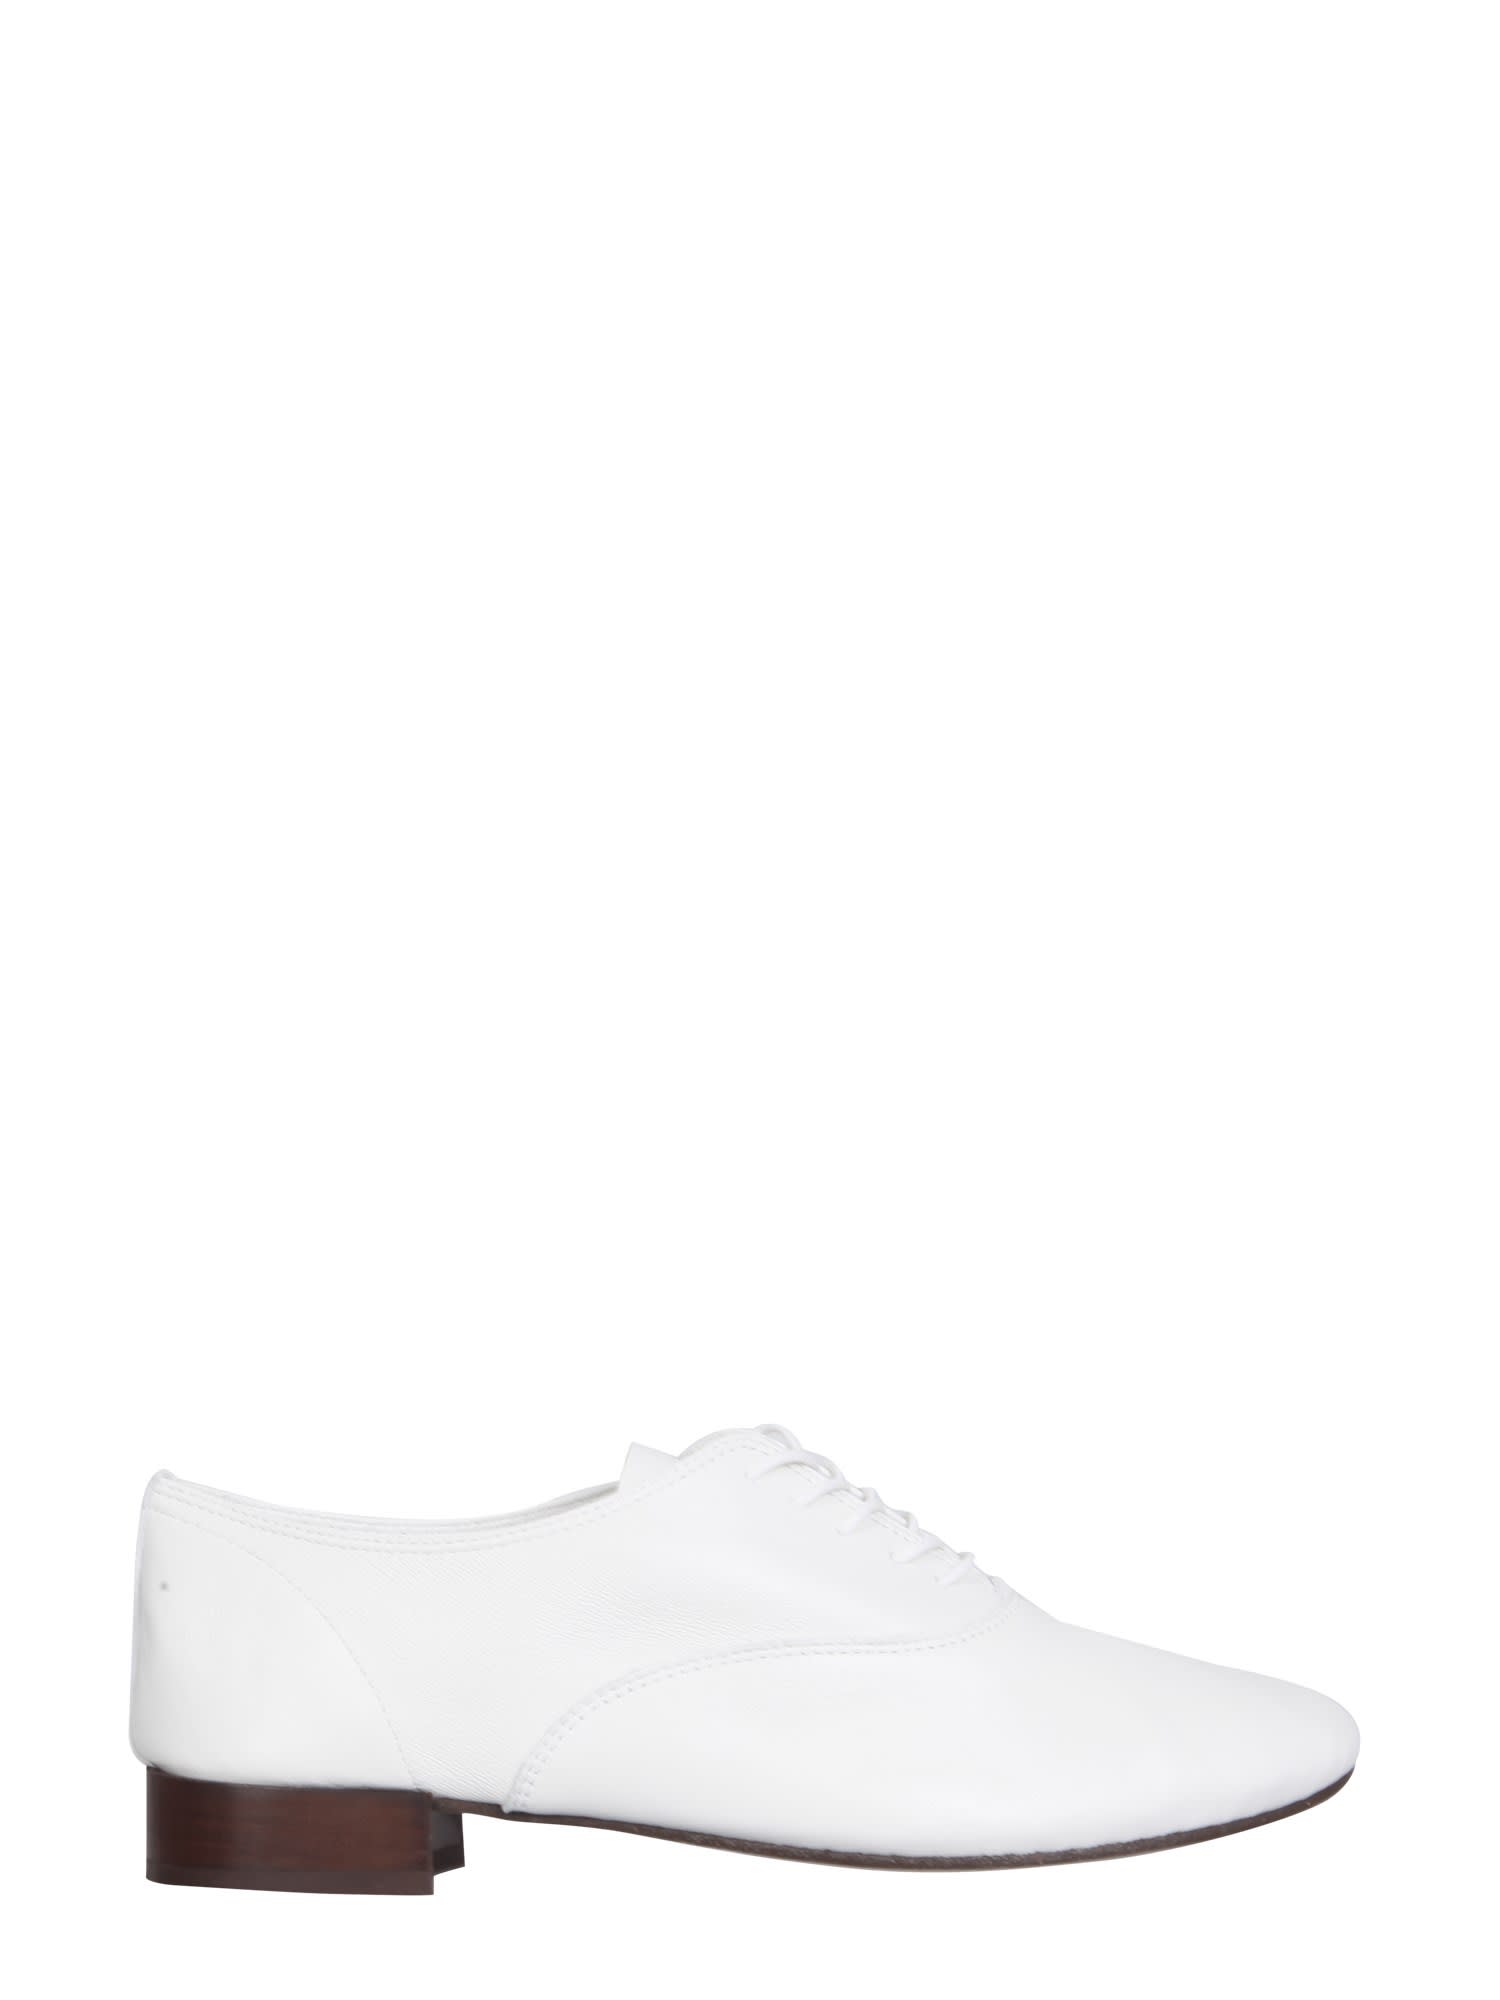 REPETTO ZIZI LEATHER LACE-UP